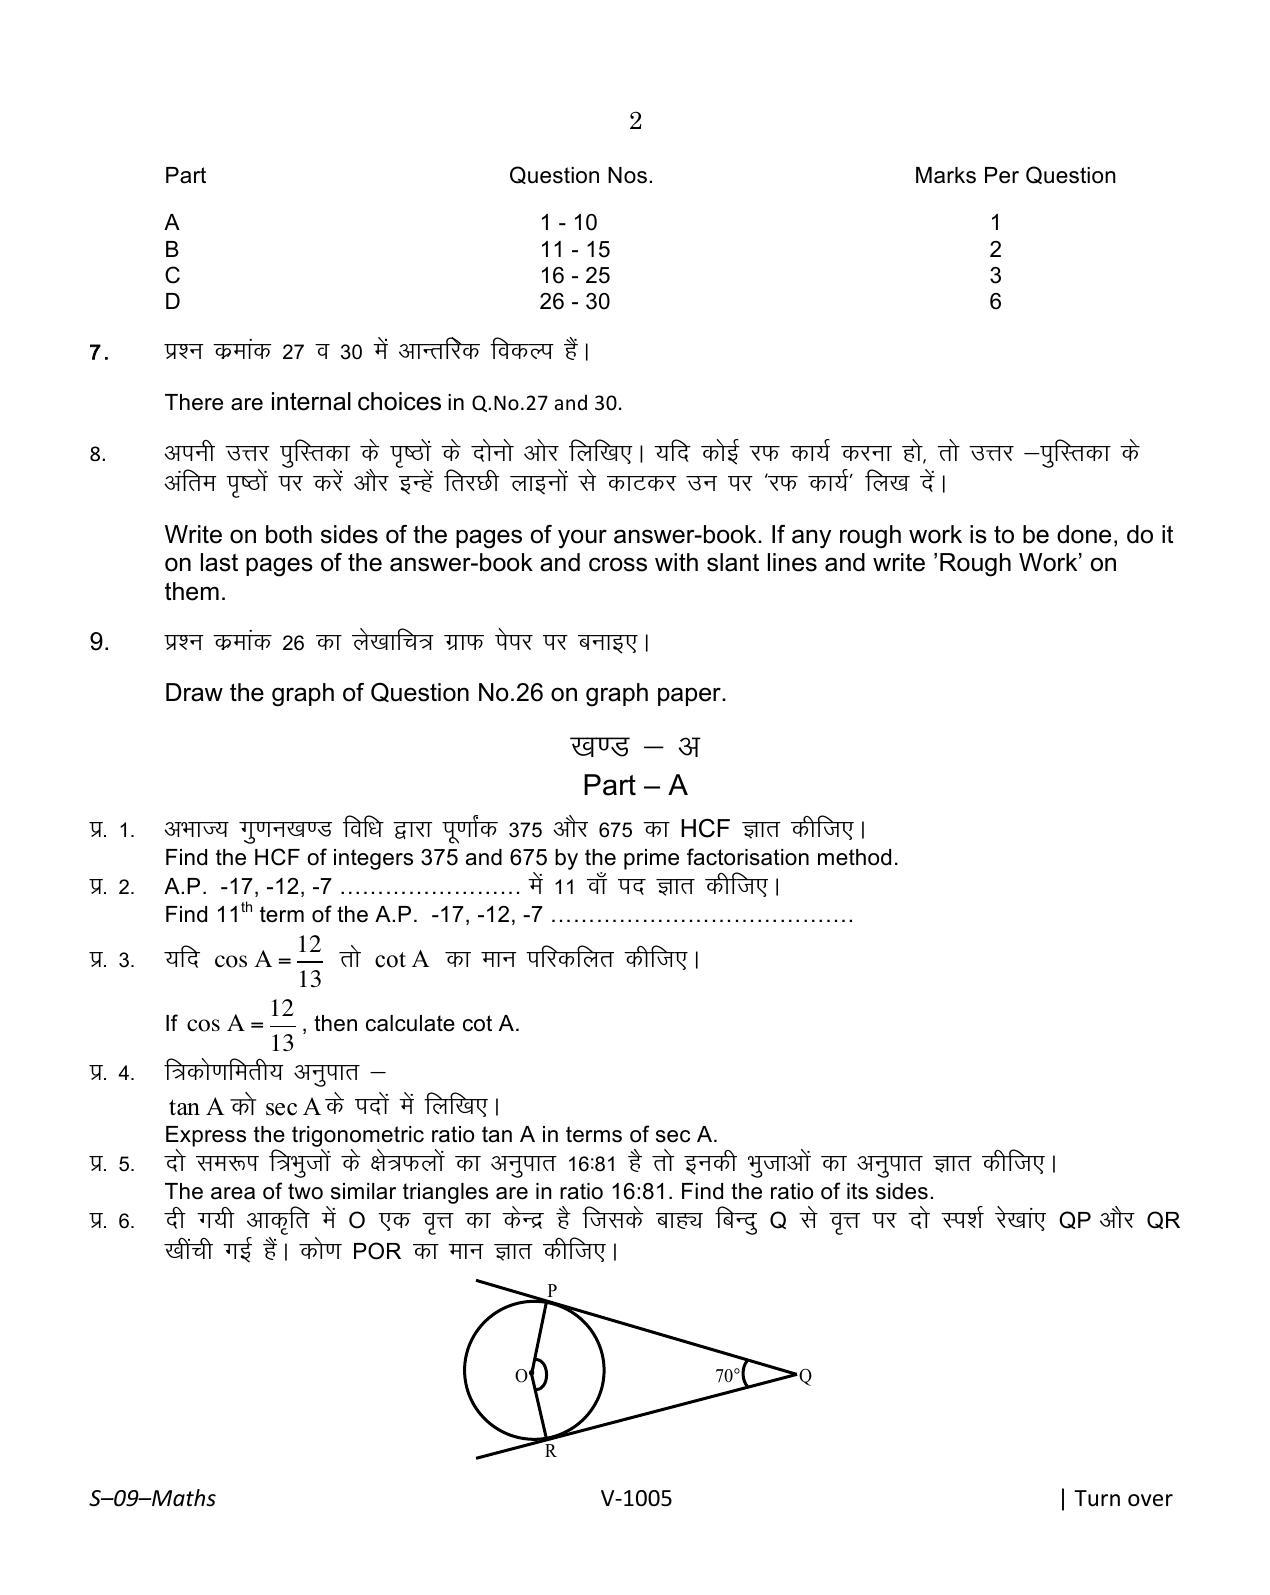 RBSE Class 10 Mathematics 2016 Question Paper - Page 2